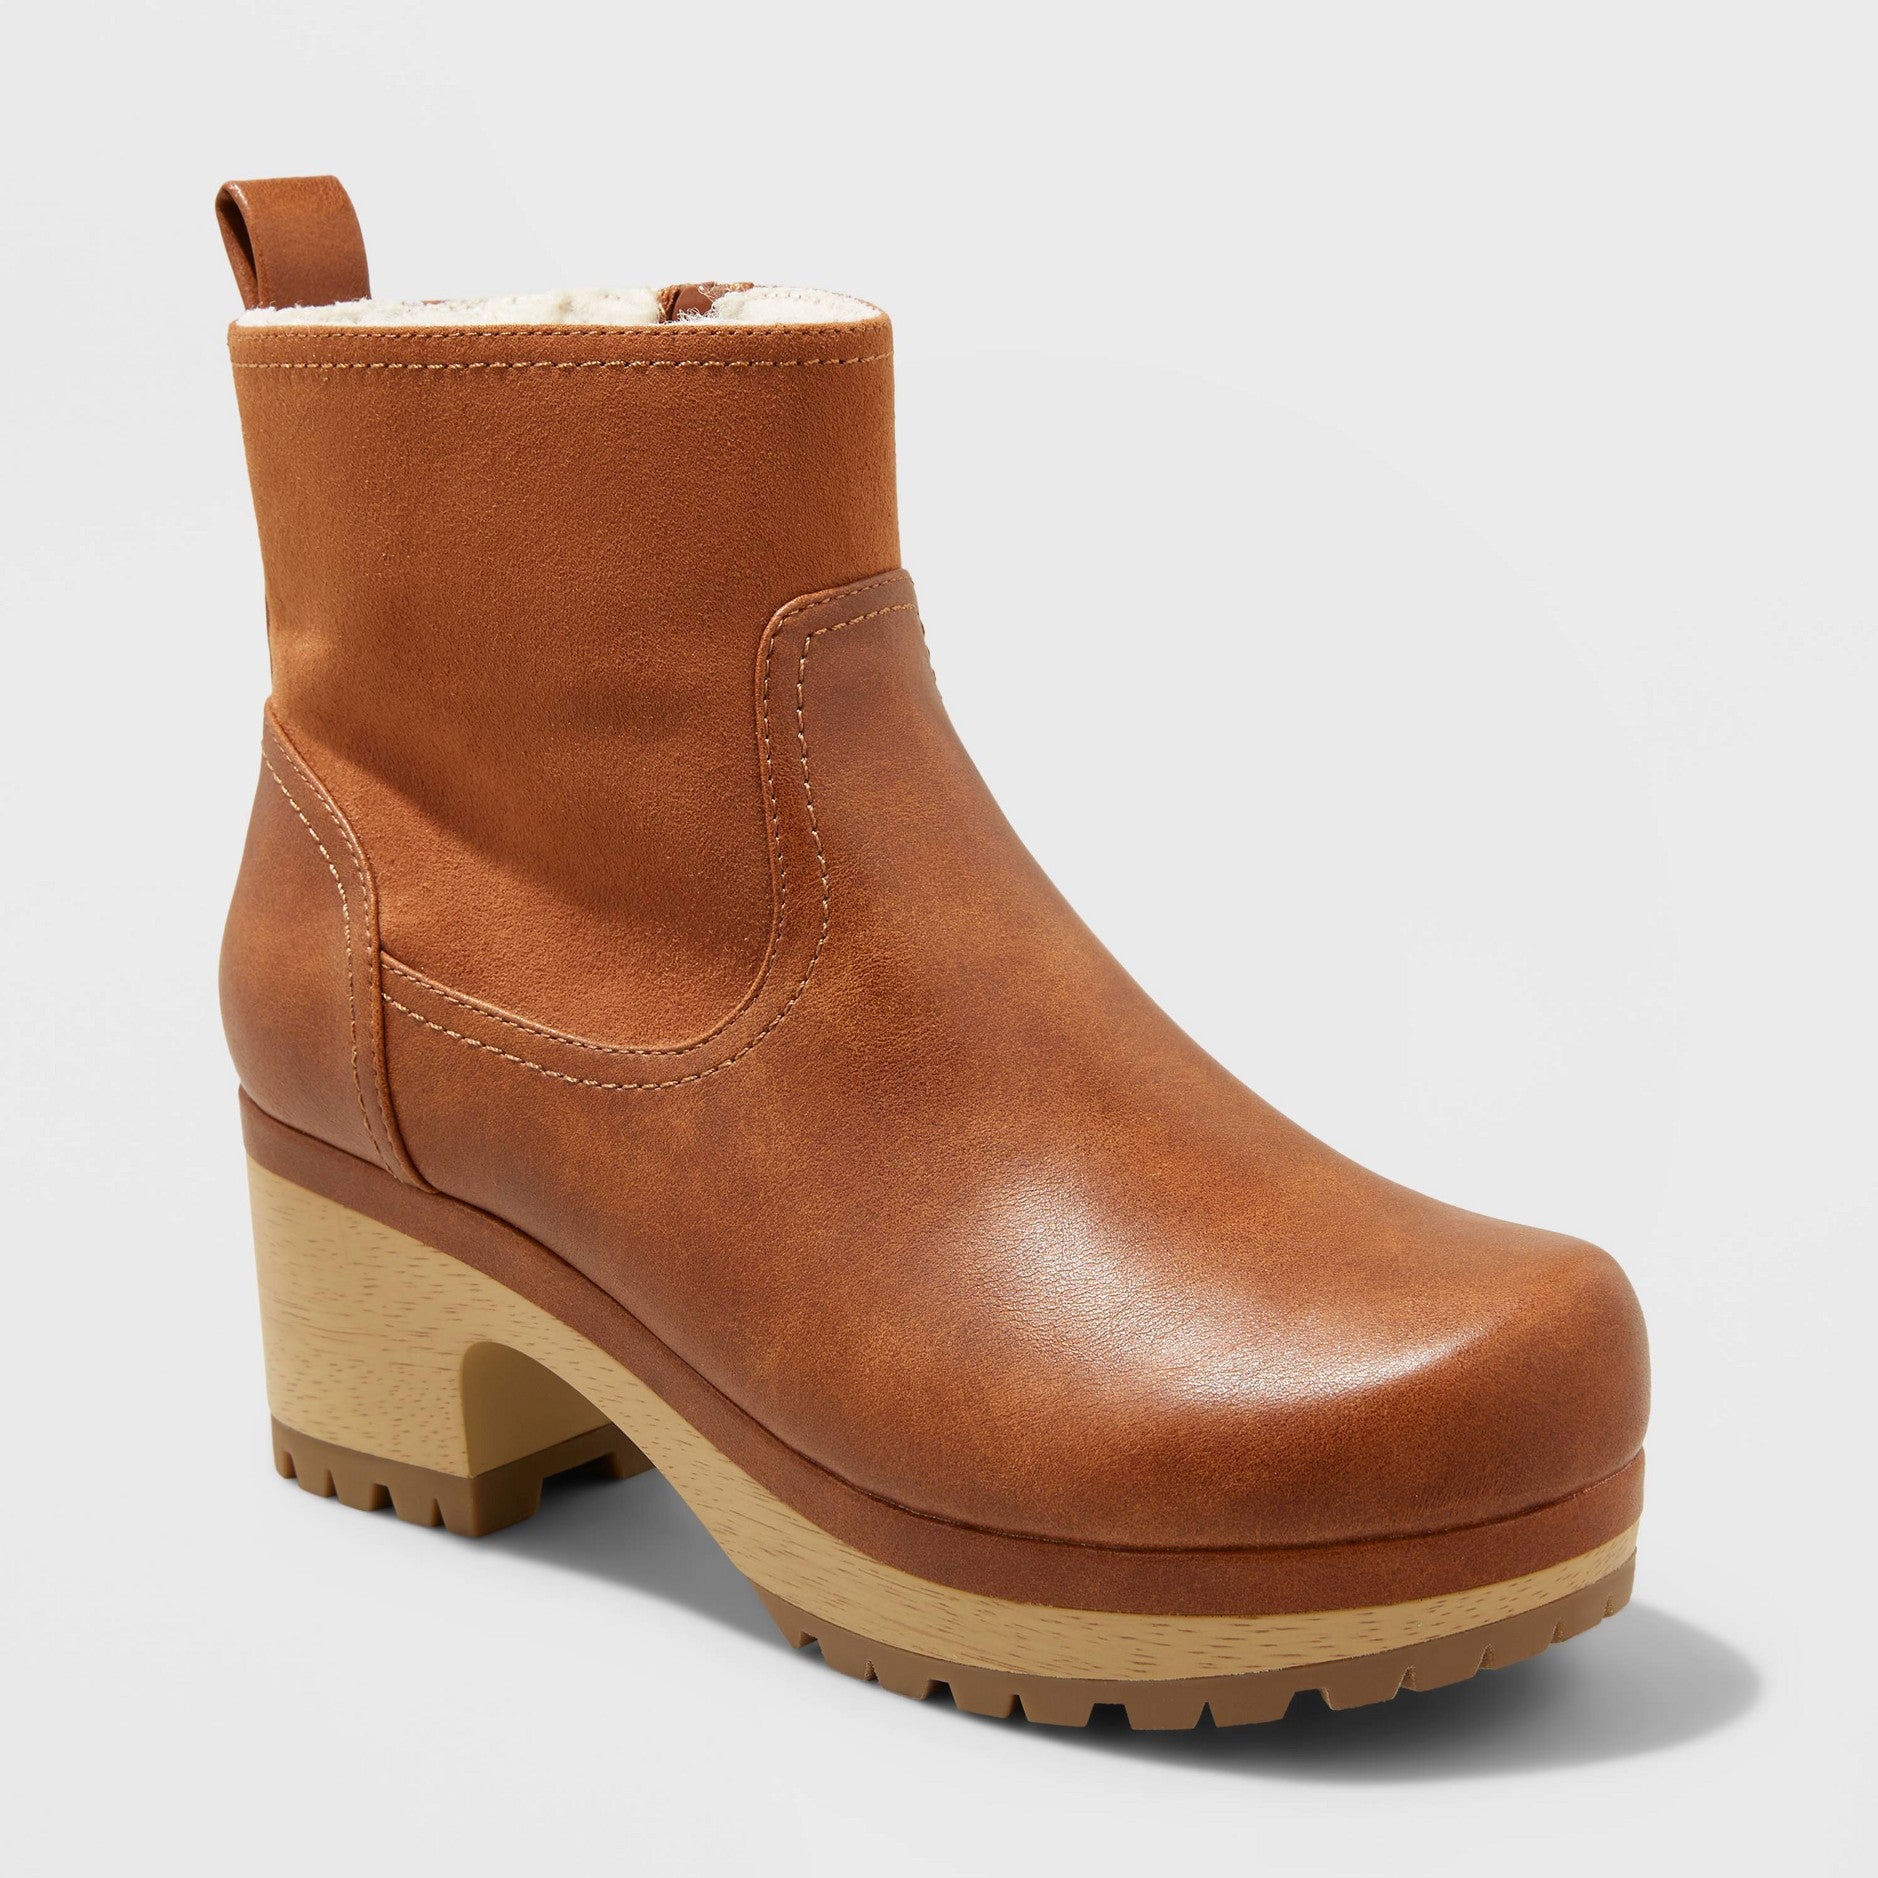 Genre Spænding Kristendom This Expensive-Looking Clog Is Only $40